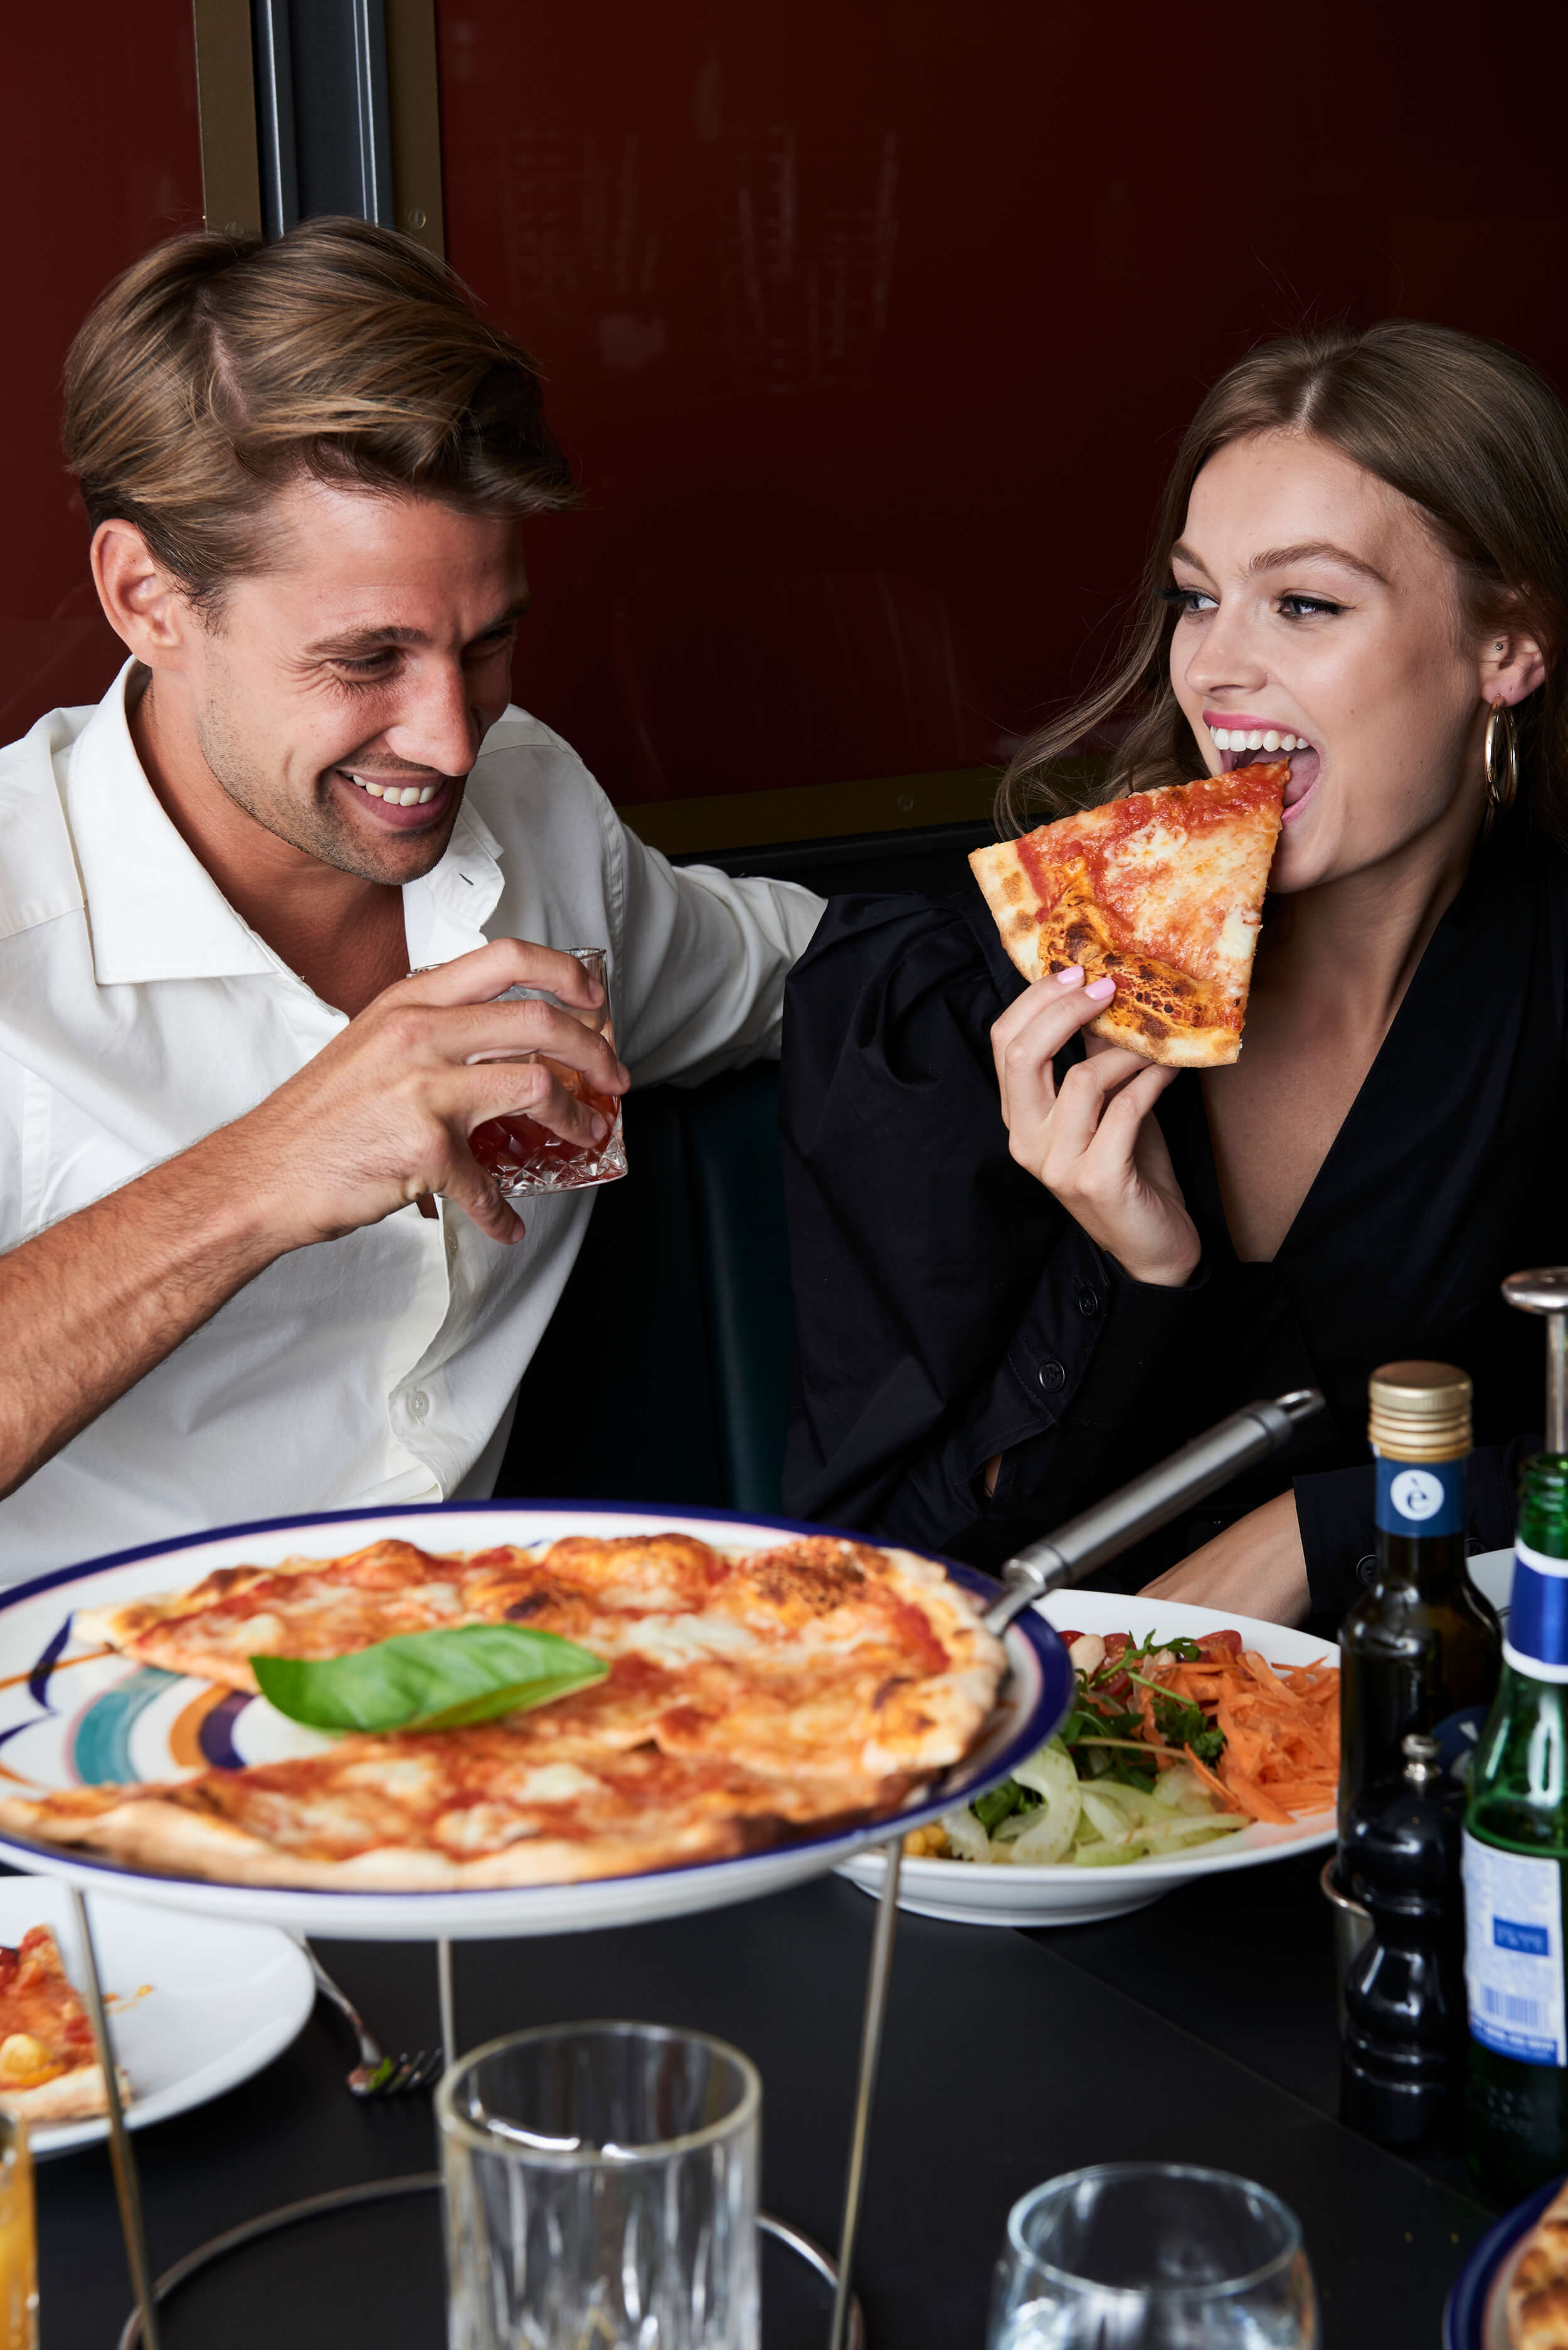 Couple eating pizza and drinking cocktails.